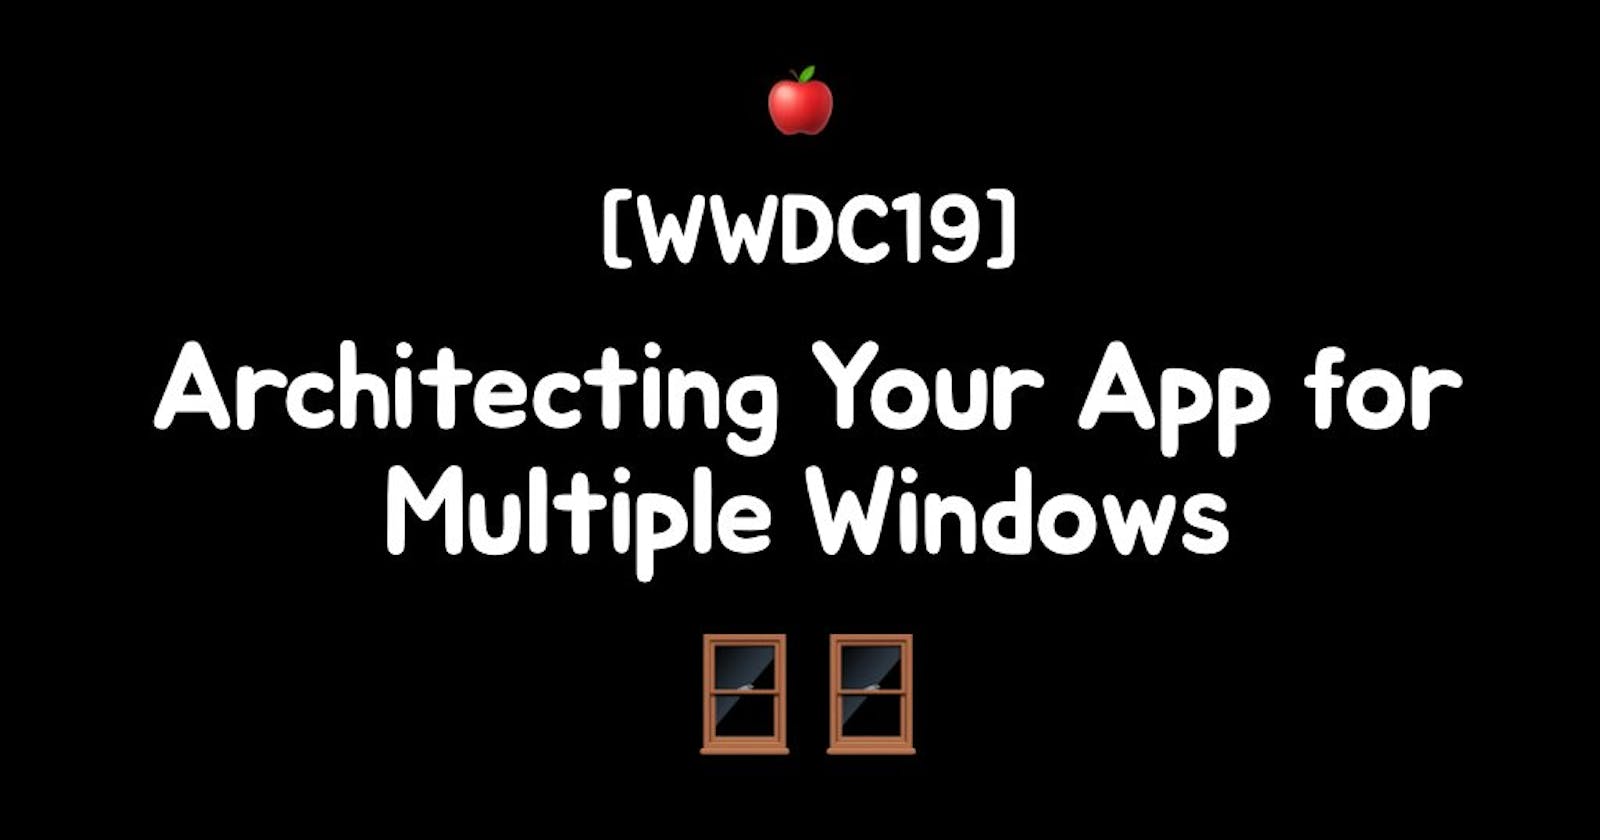 [WWDC] Architecting Your App for Multiple Windows